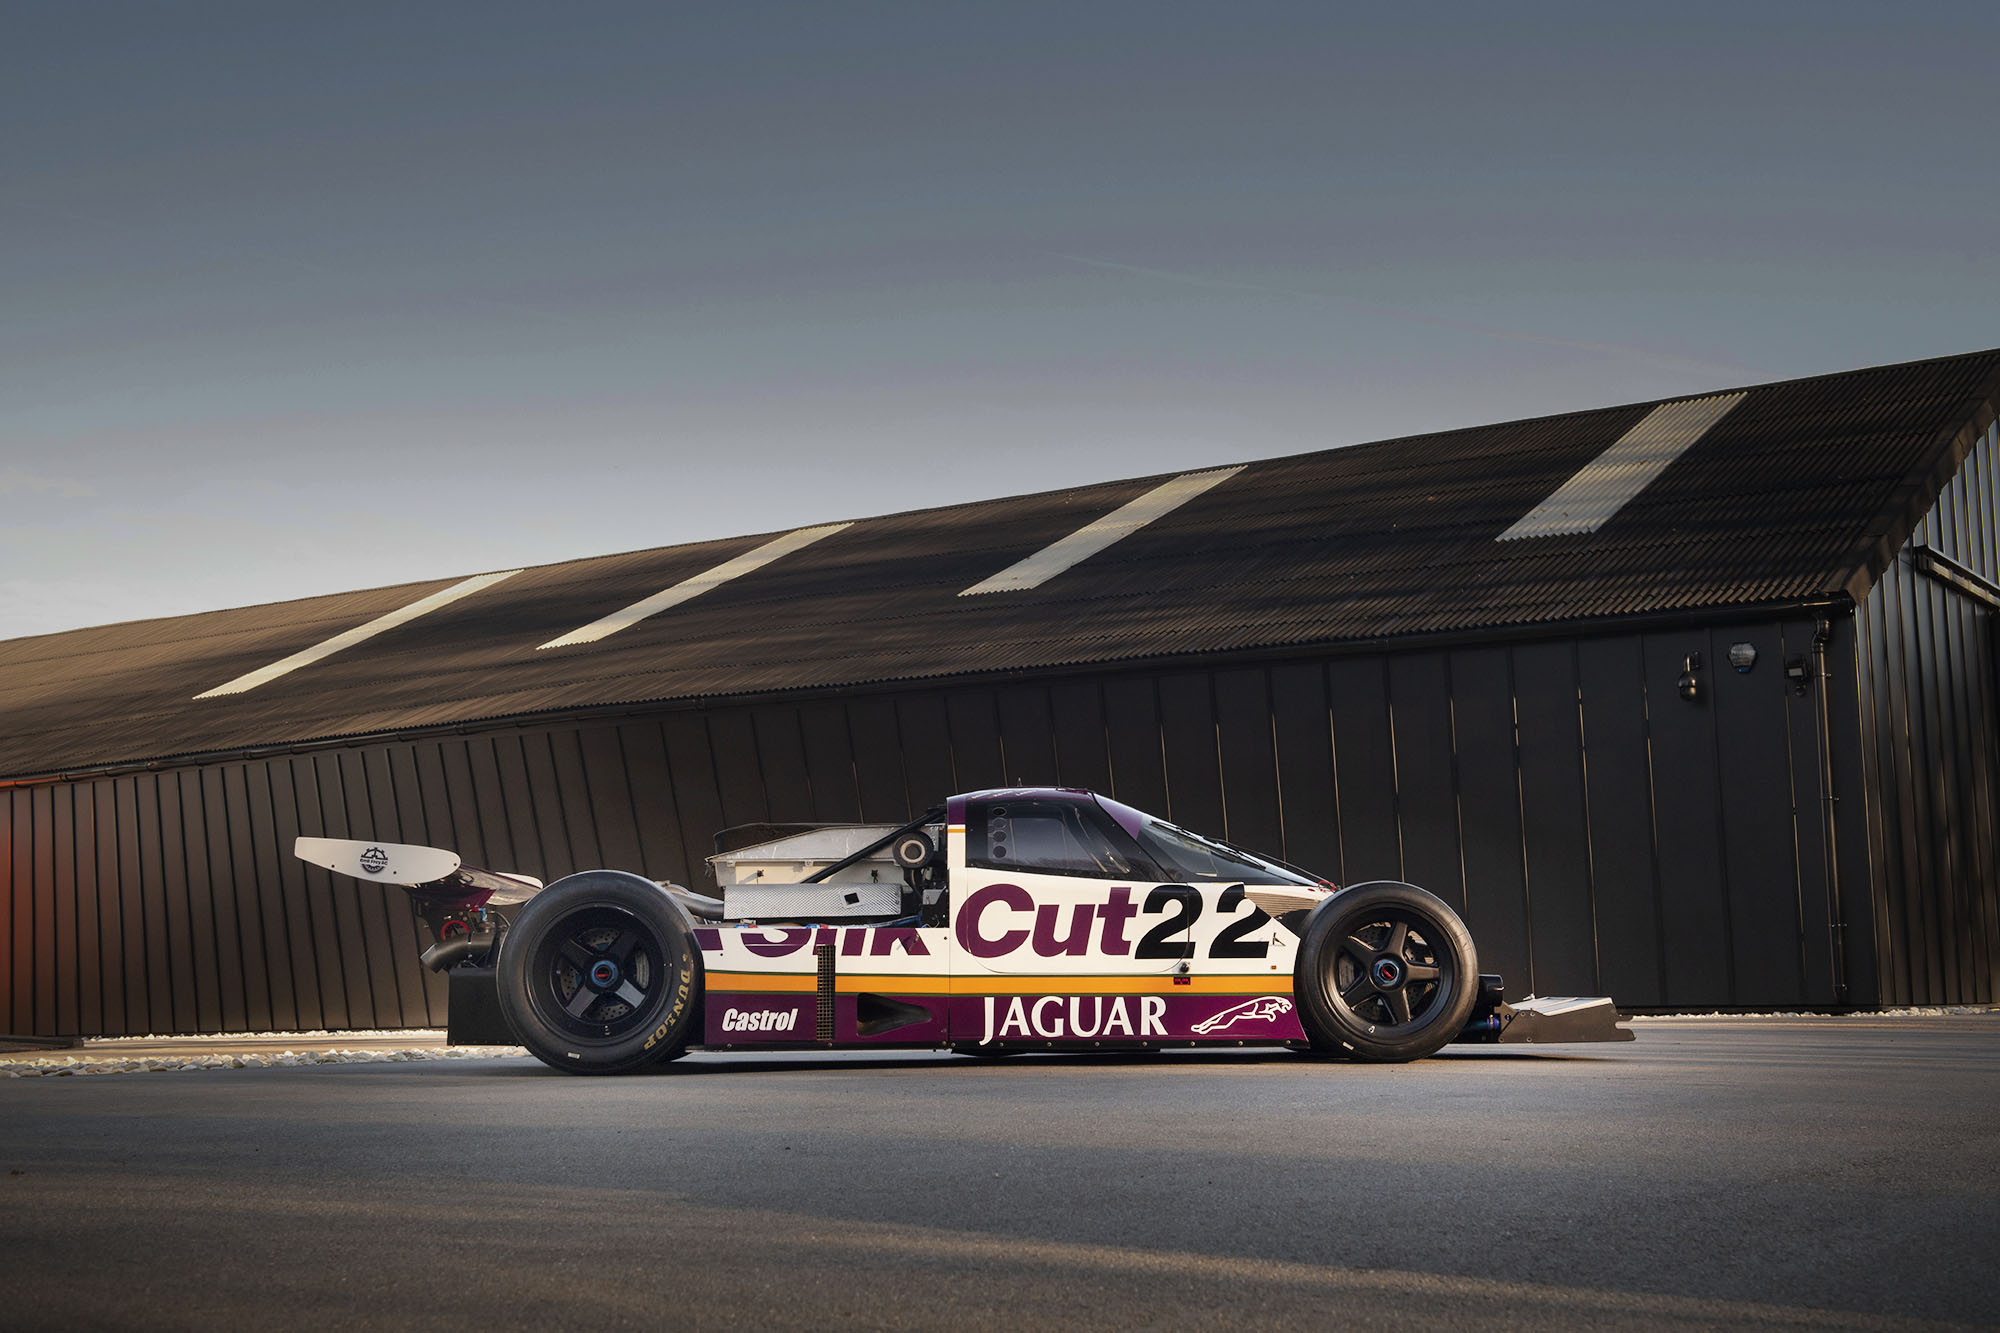 1986 Jaguar XJR-9LM - veteran of three Le Mans 24hrs and the most 